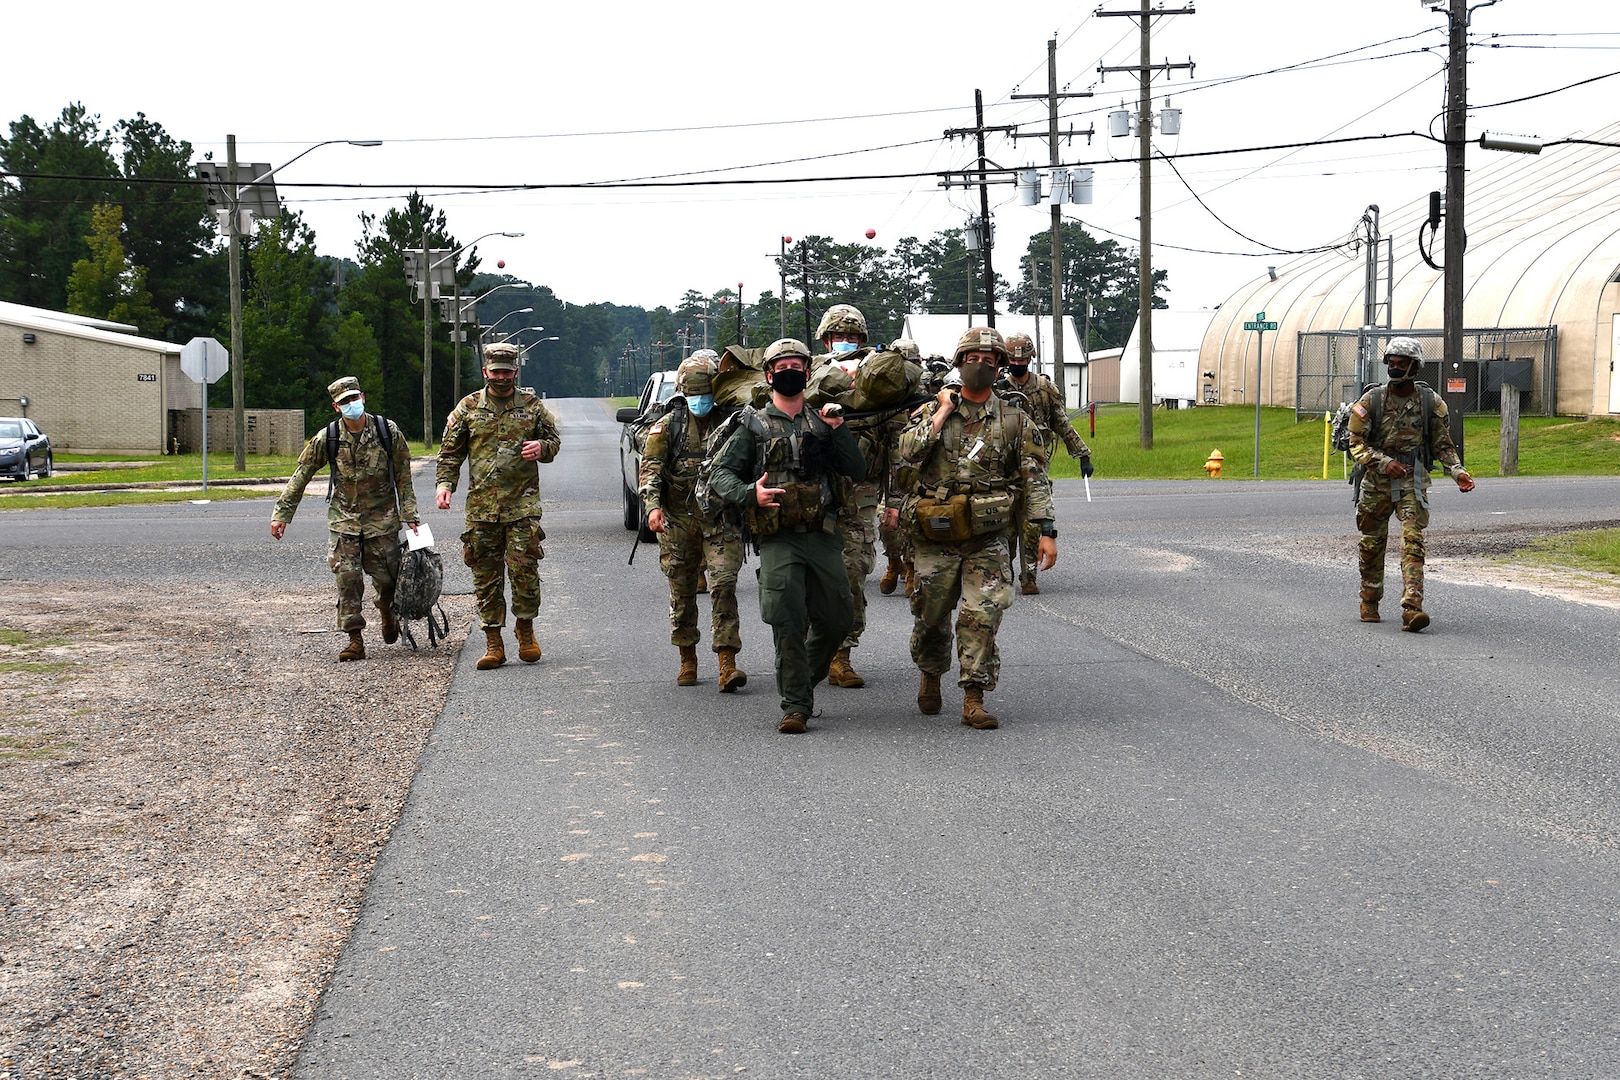 After treating the “injured” Soldiers, medics strap them to stretchers and ruck marching them to the Joint Readiness Training Center Rear Aid Station to continue the training Aug. 6.